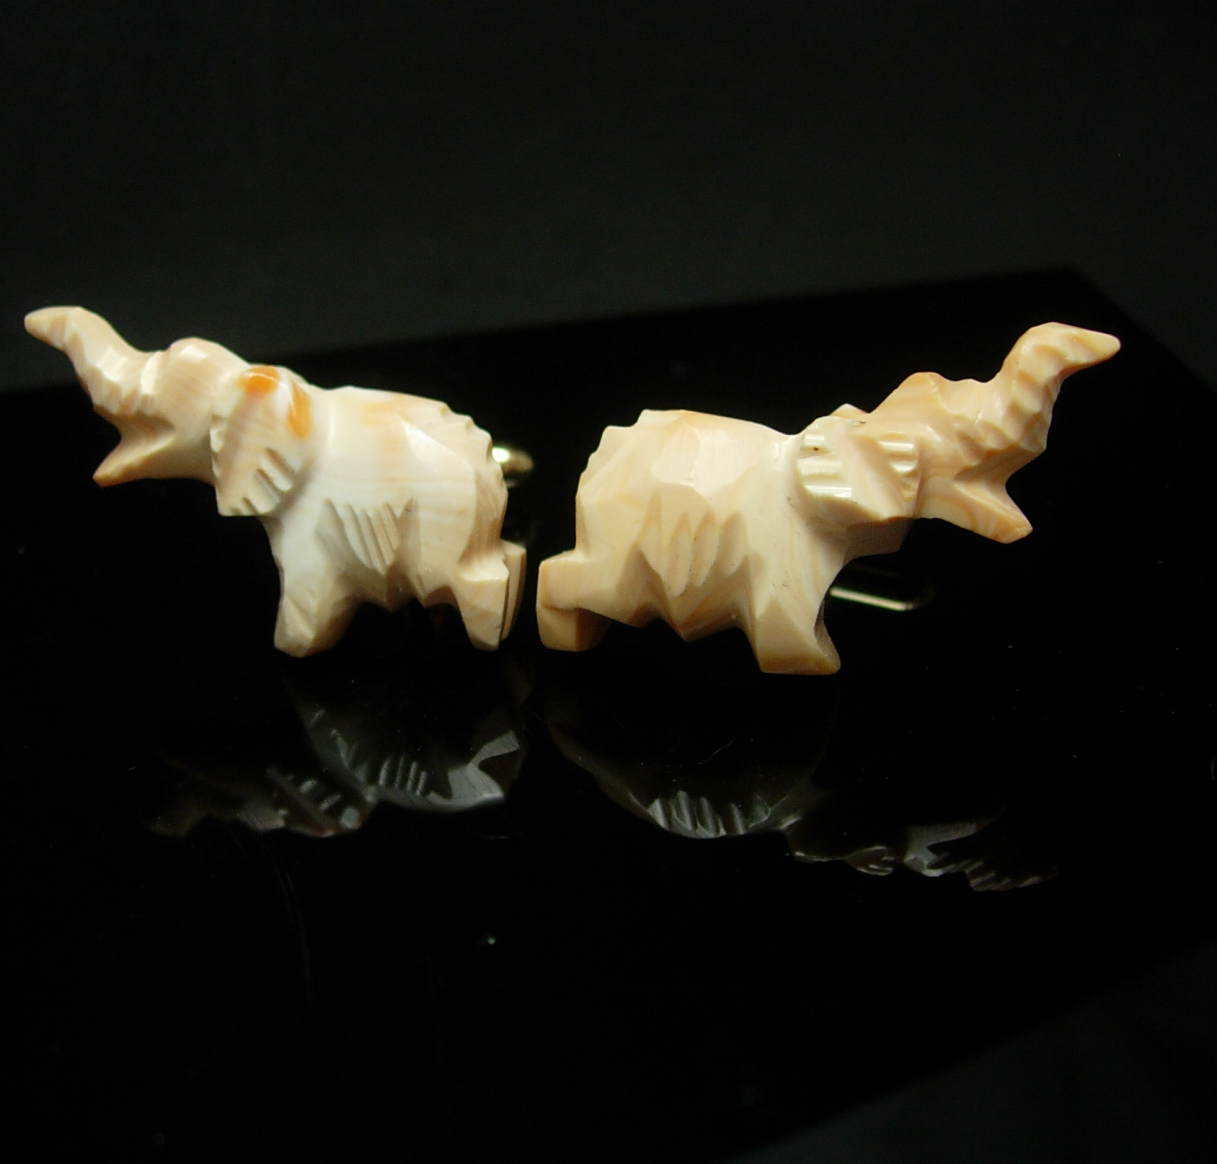 Primary image for Carved Elephant Cuff links HUGE Good Luck Unusual Cufflinks Men's novelty figura